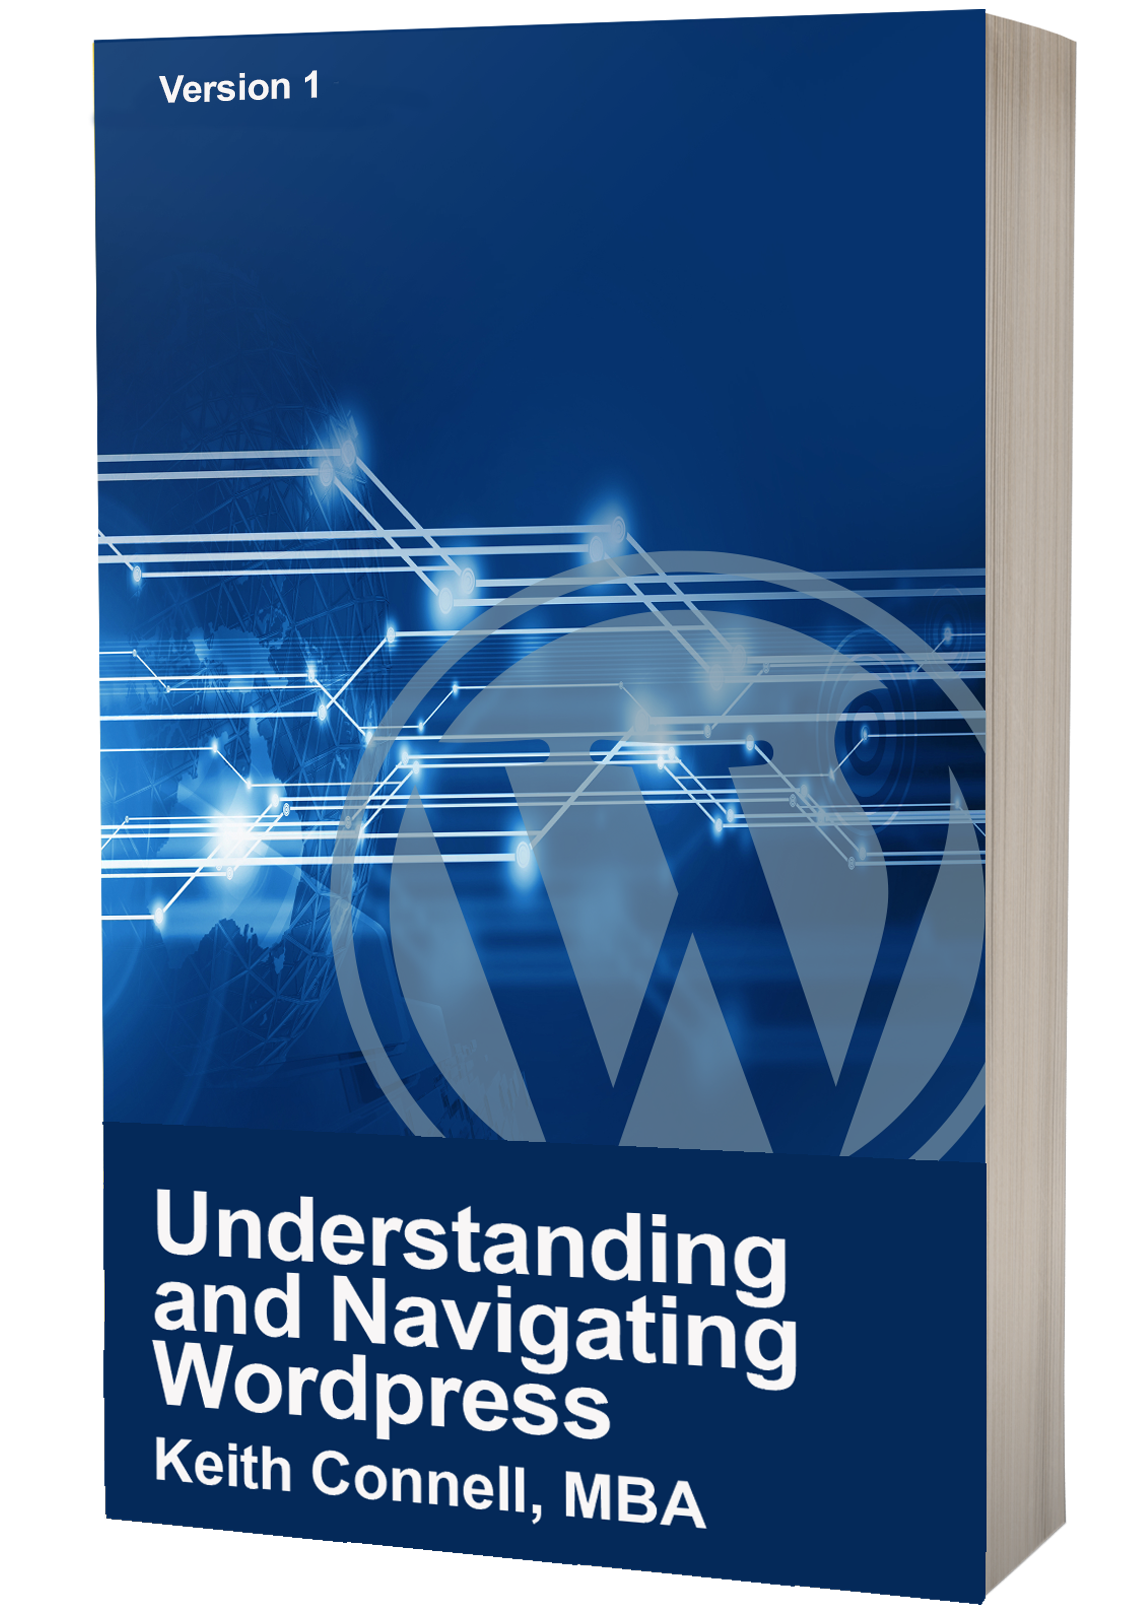 Educational leadership means understanding your subject matter. Image of Keith's Understanding and Navigating WordPress ebook.